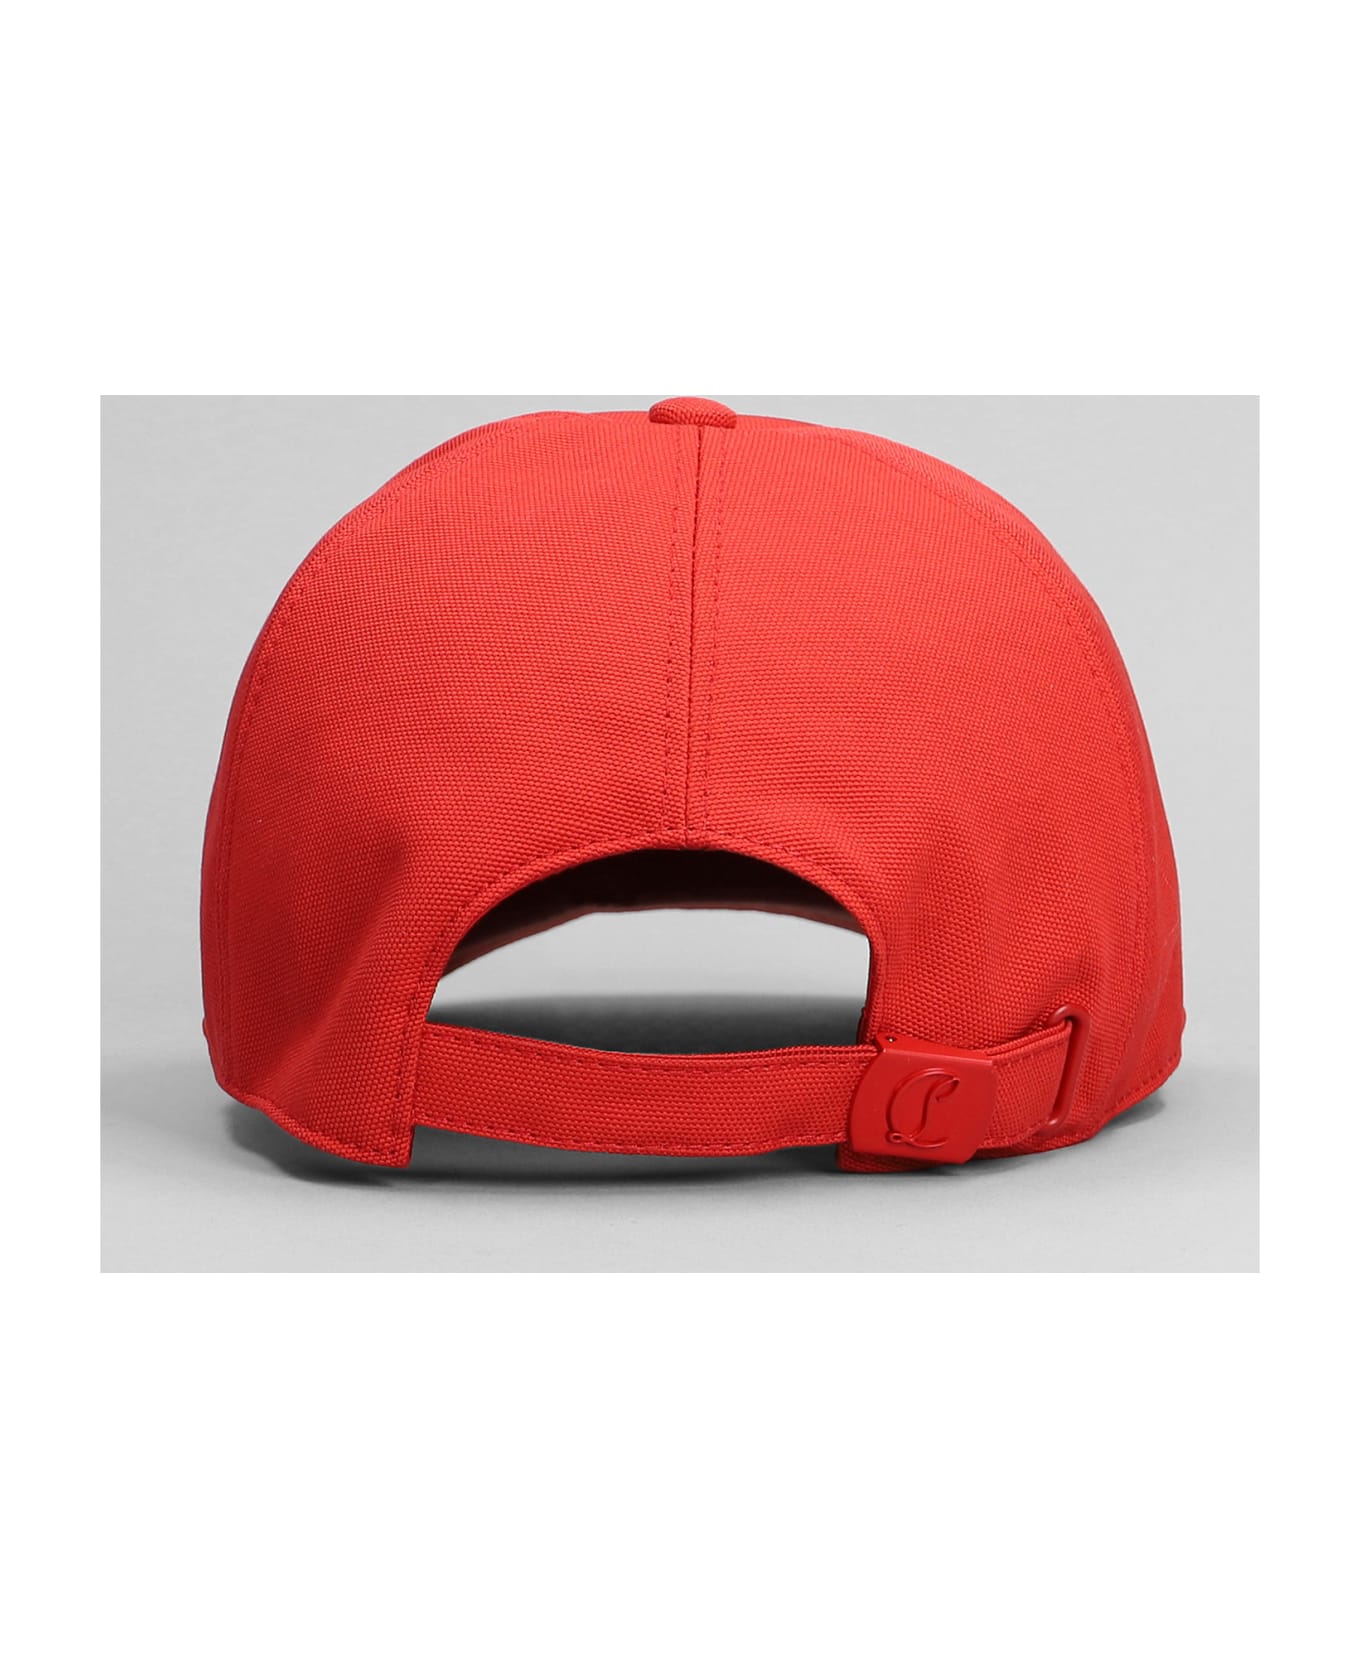 Christian Louboutin Hats In Red Cotton - red